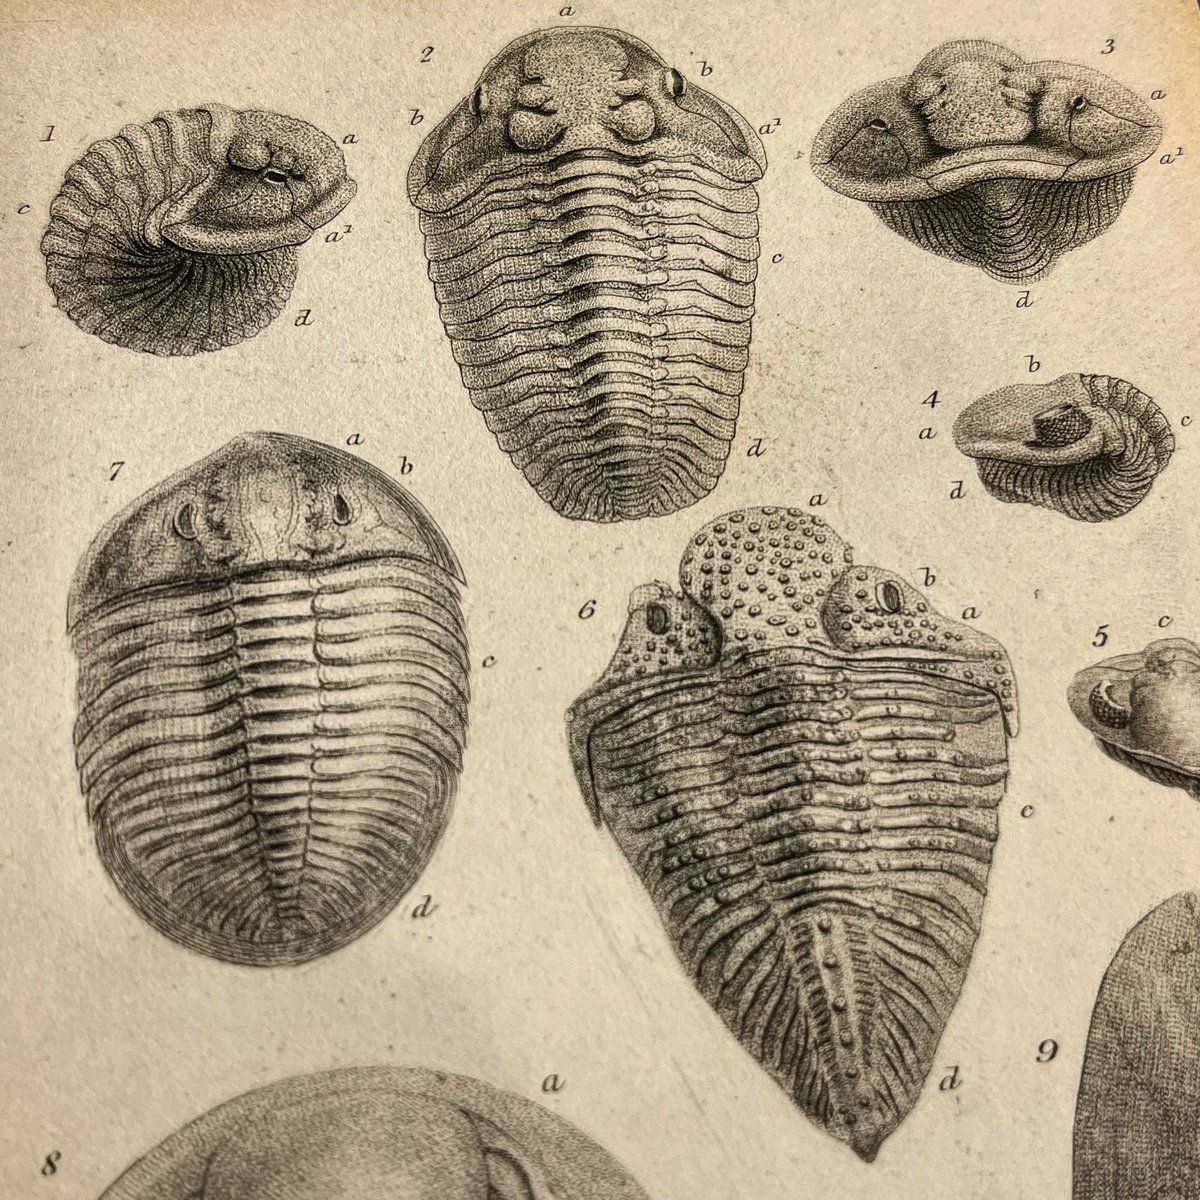 Very nice old trilobite illustration, taken from Rev. William Buckland (1784-1856), Geology and mineralogy considered with reference to natural theology, Vol. II, 1837, plate 46 (London: William Pickering)
#trilobites #fossilfriday